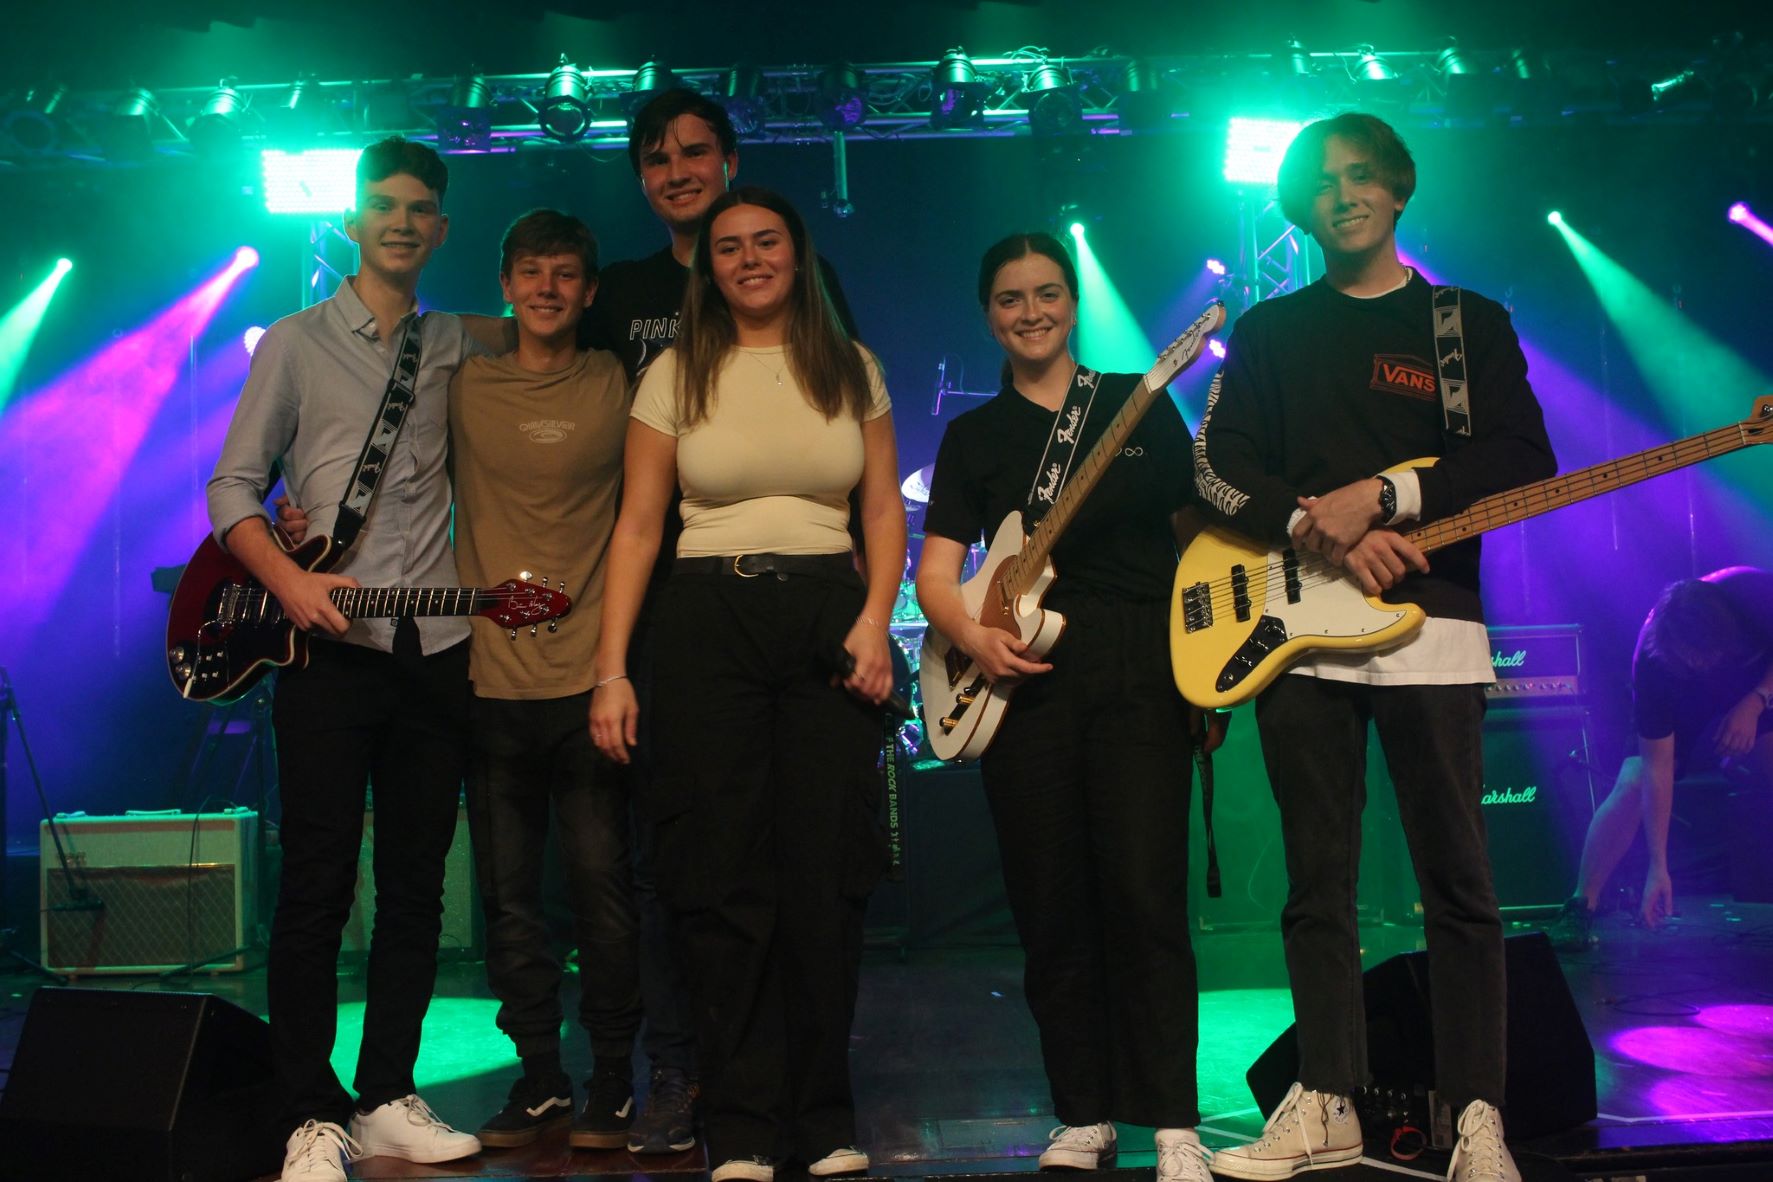 Coomera Anglican College’s Rock Band, Silent Freeway